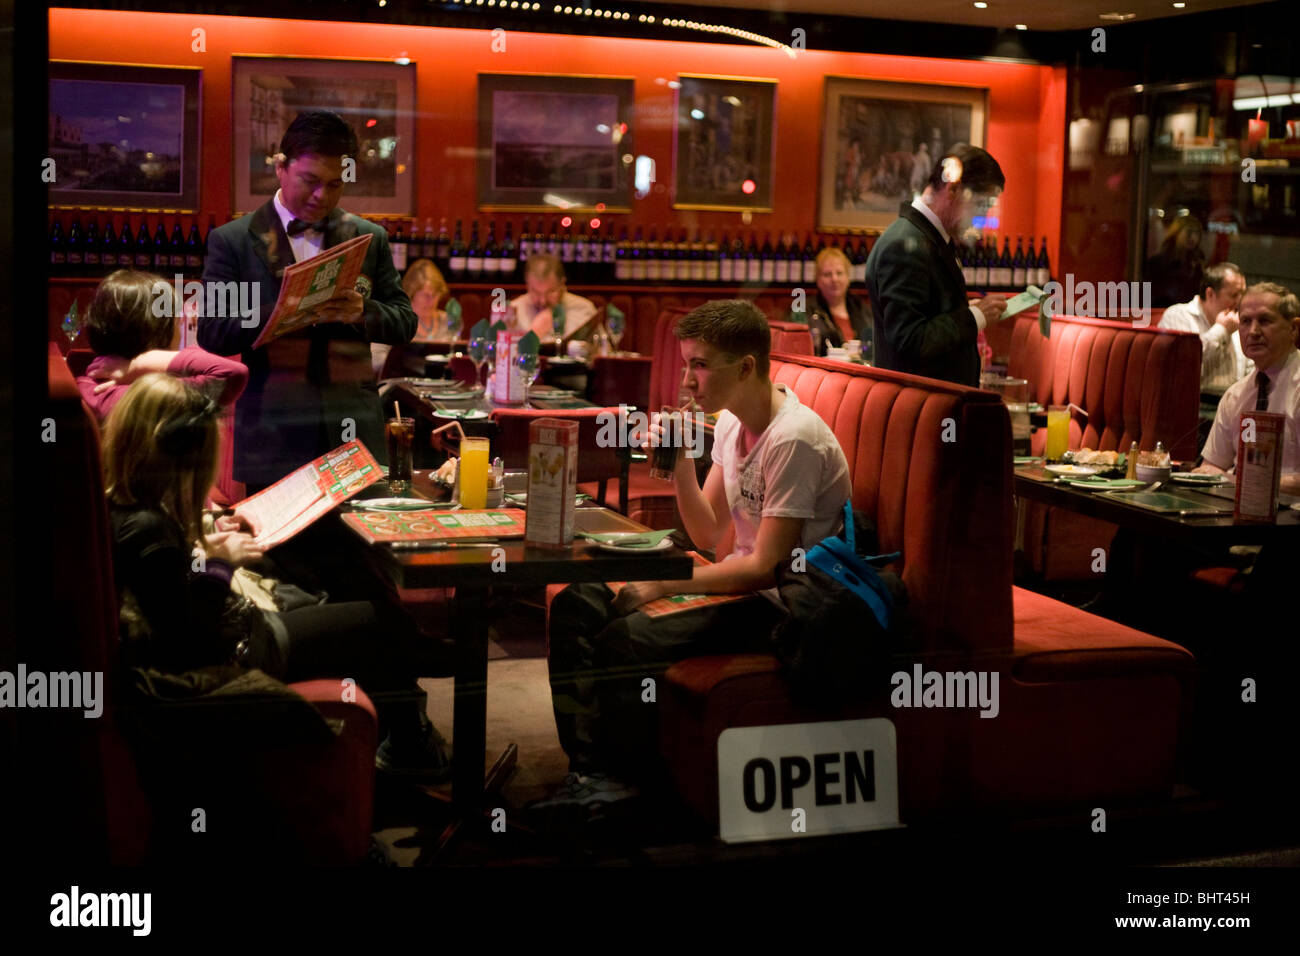 Seen through the window of an Angus Steakhouse restaurant, a family order their dinners from a waiter. Stock Photo